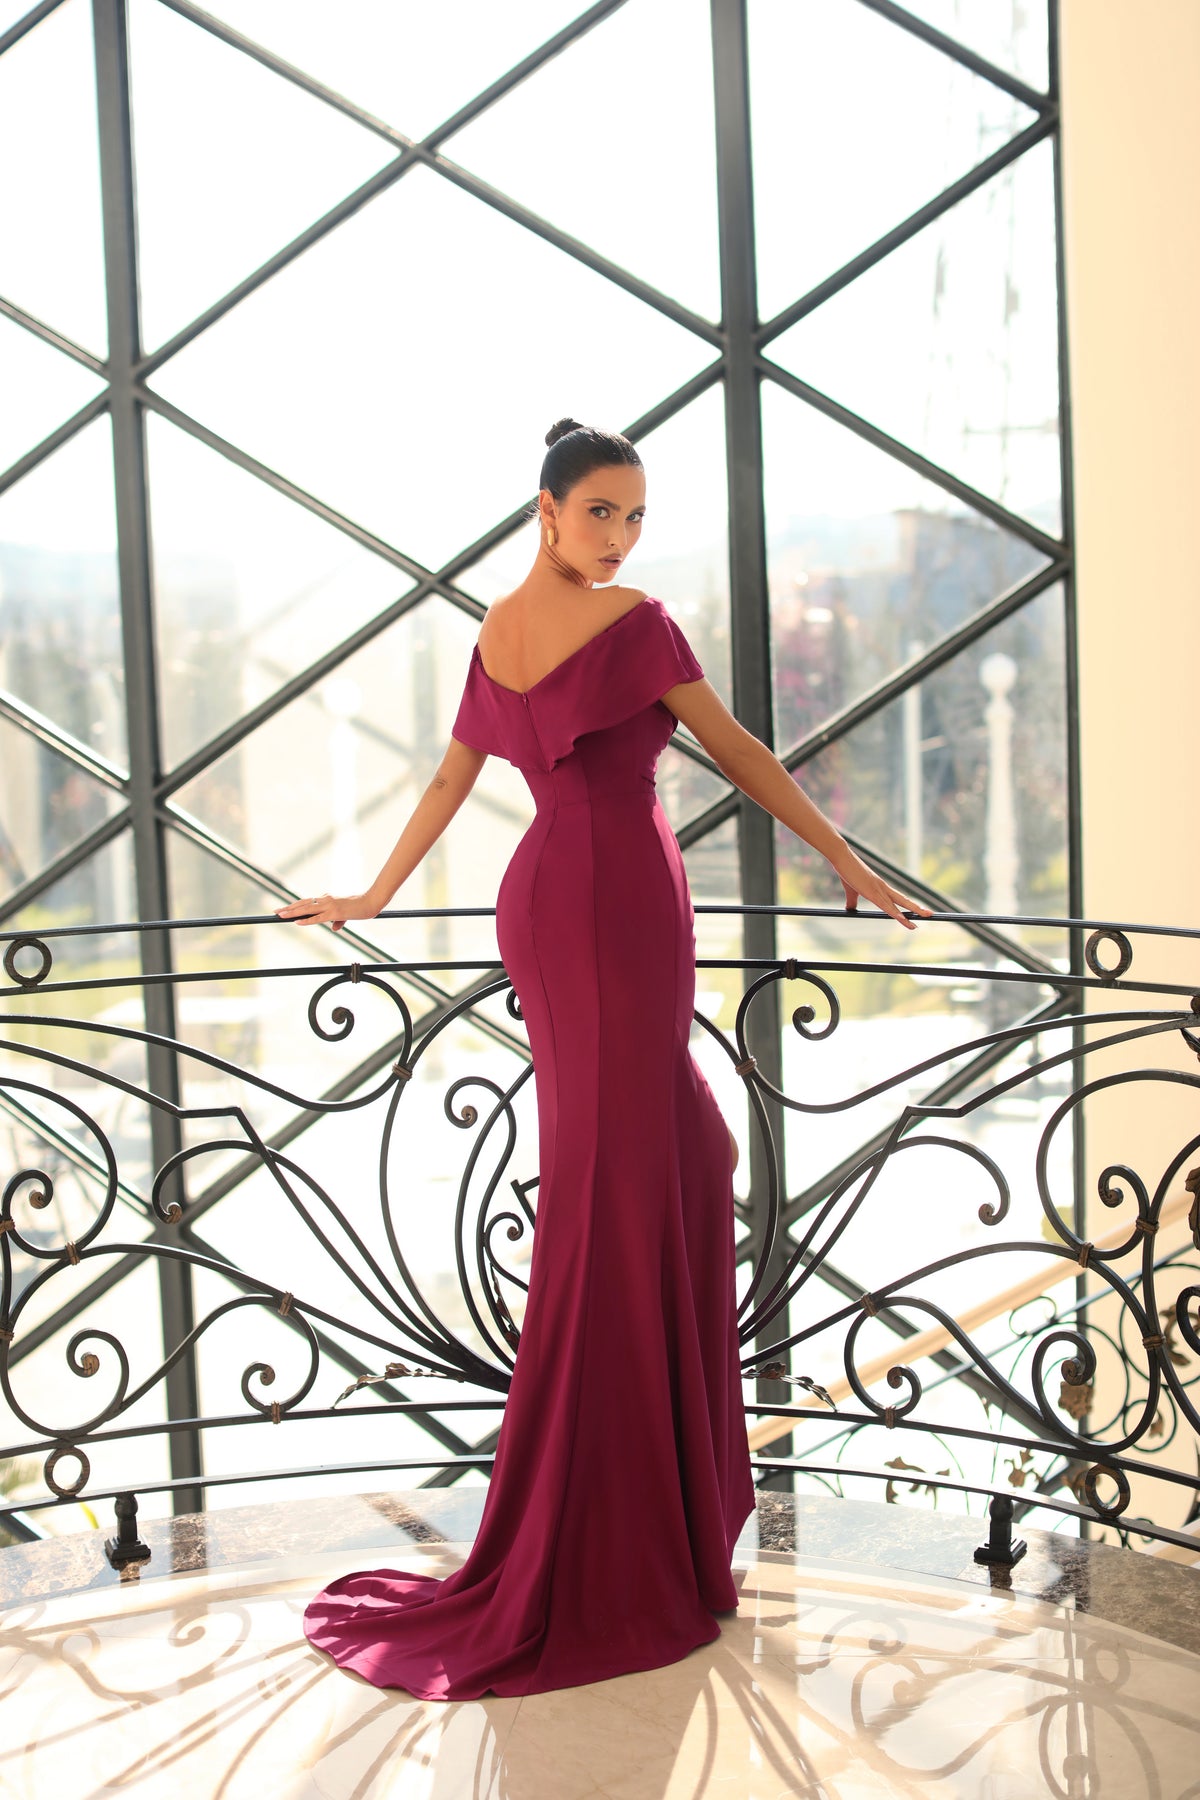 Nicoletta off-the-shoulder dress style NC1040 - Ruched bodice, sweetheart neckline, thigh-high slit, and side ruffle. Perfect for formal evening events and special occasions.